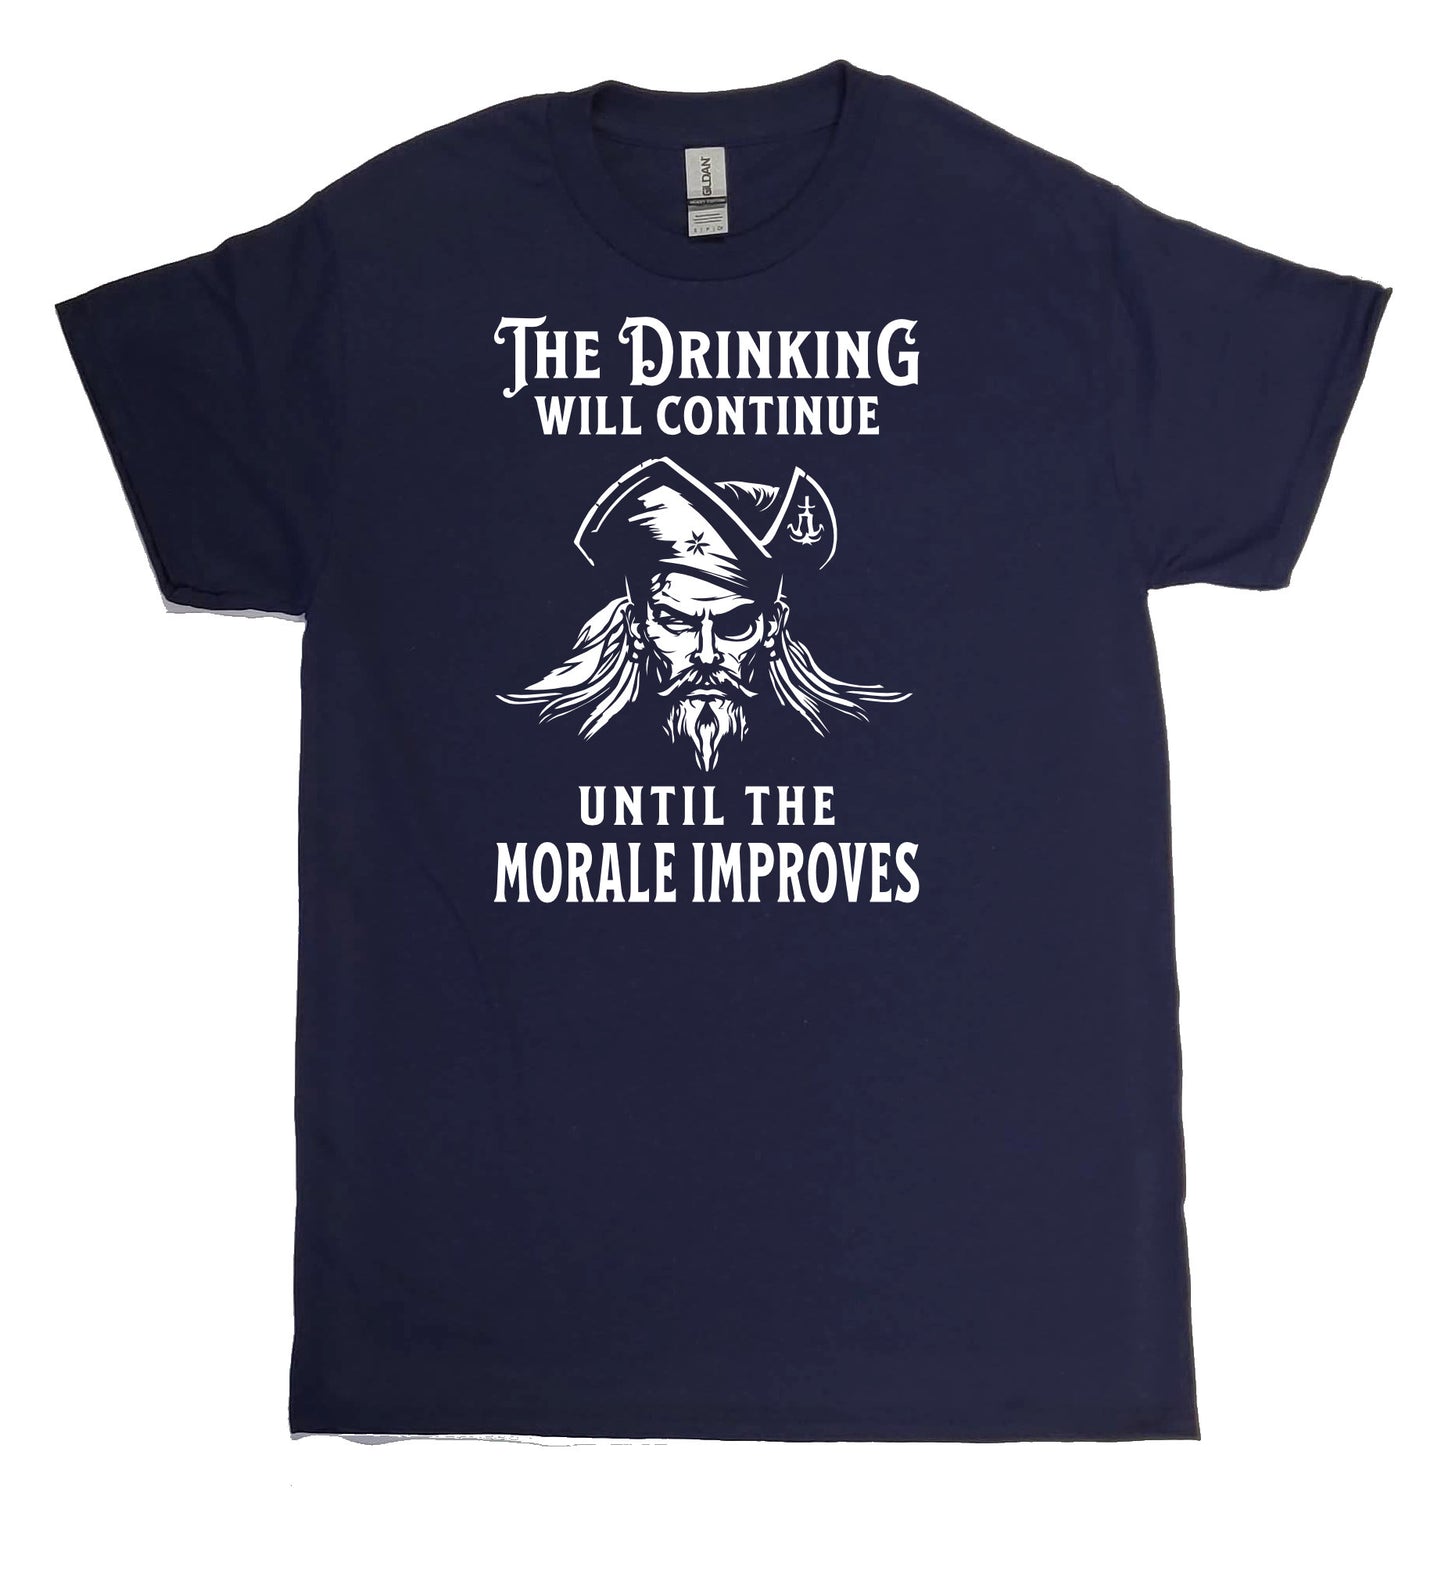 Maritime Swag  Pirate Drinking Morale Improves Tee